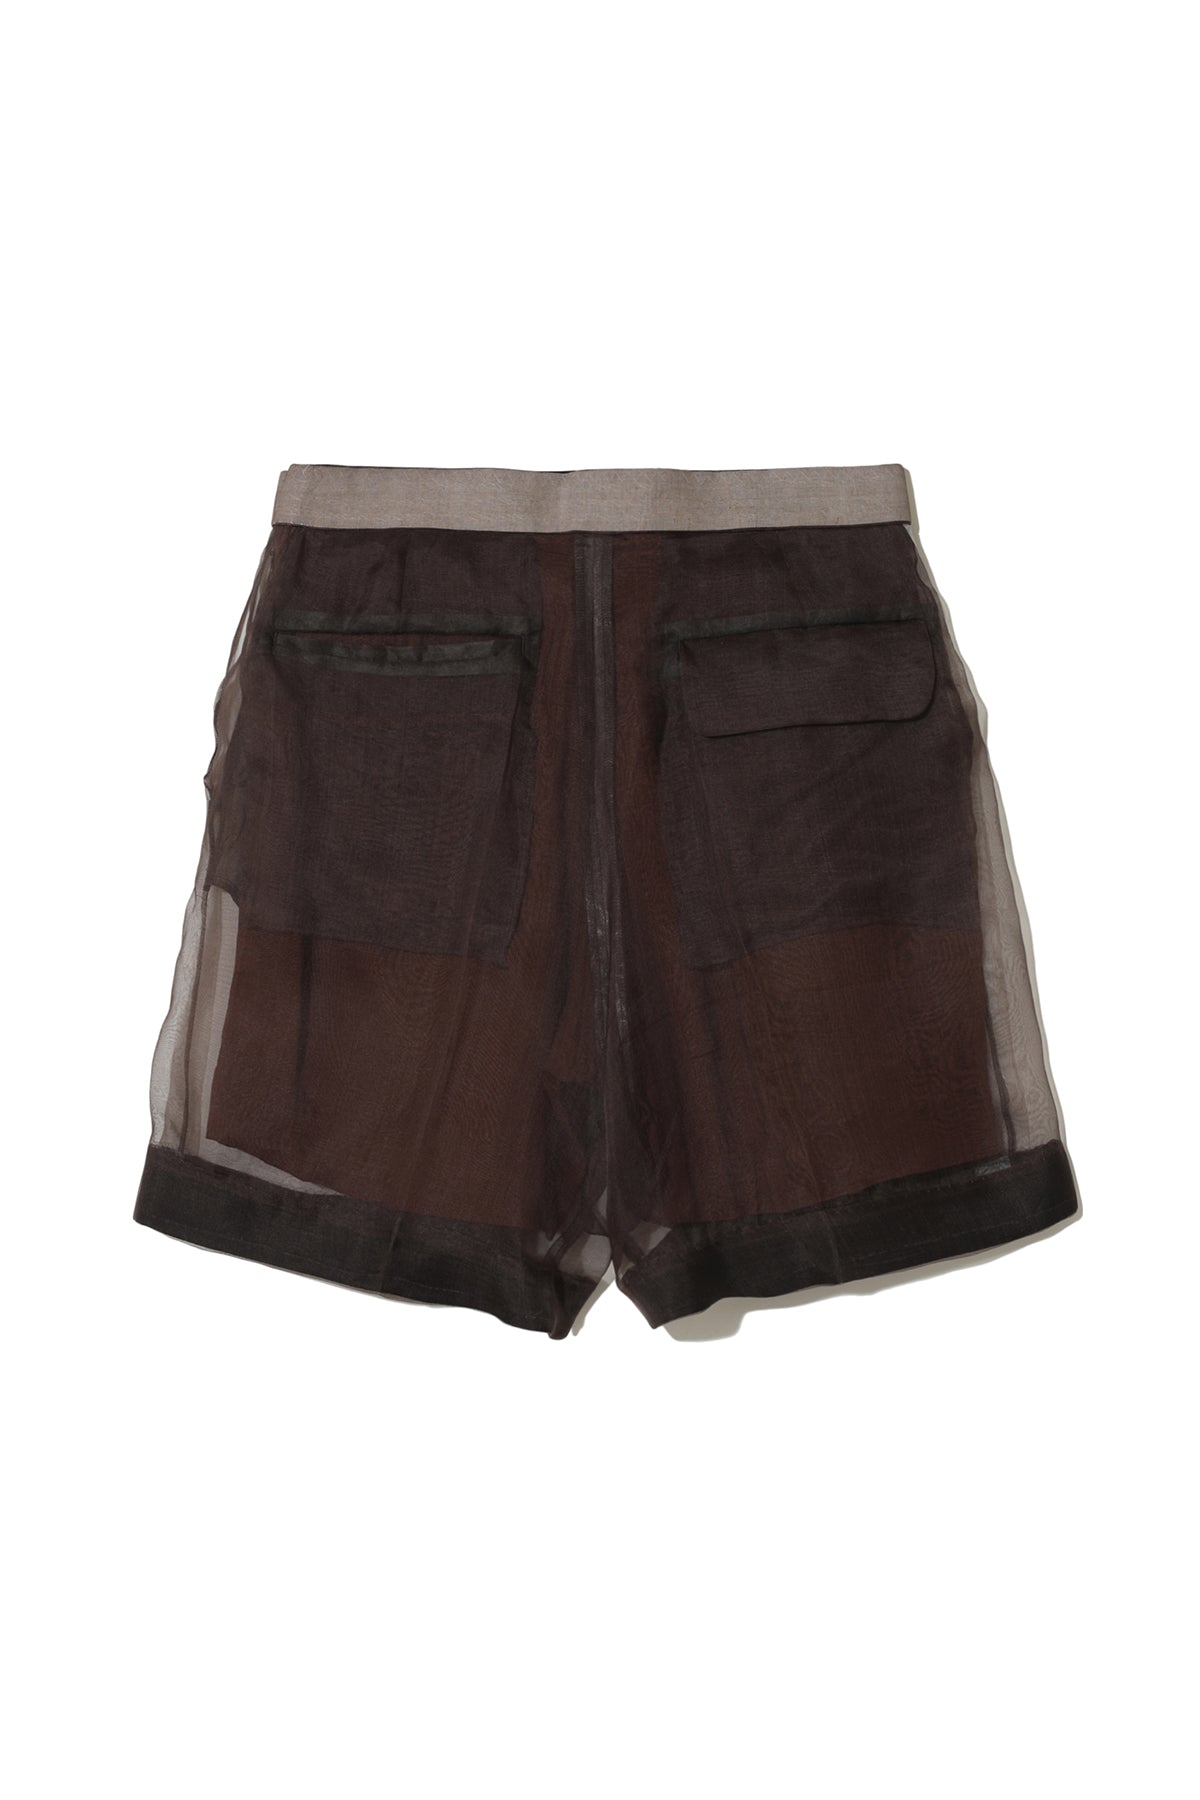 UNDERCOVER | LAYERED SHORTS